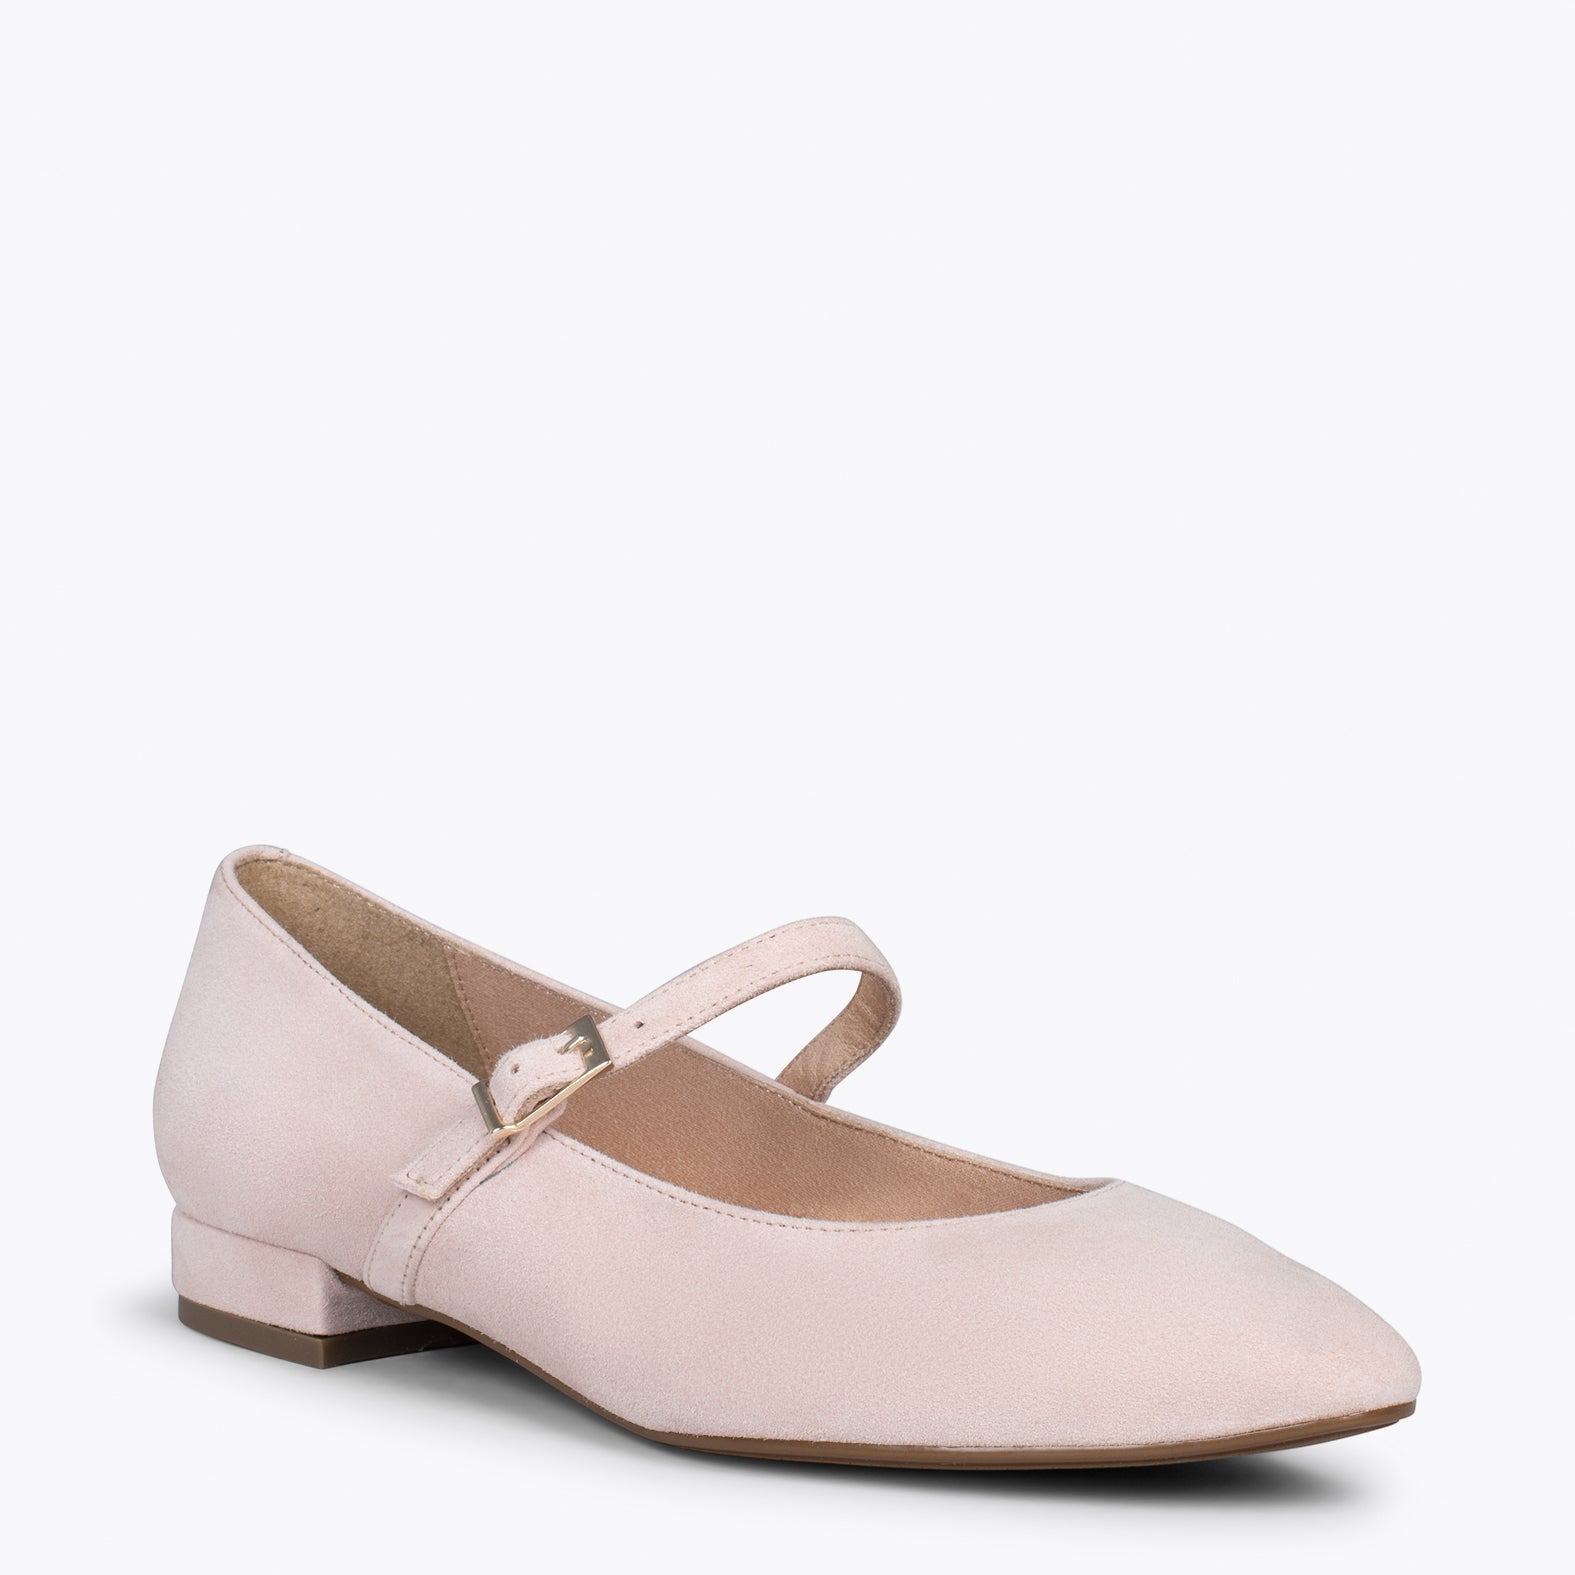 MARY-JANE – PALE PINK buckled leather flats